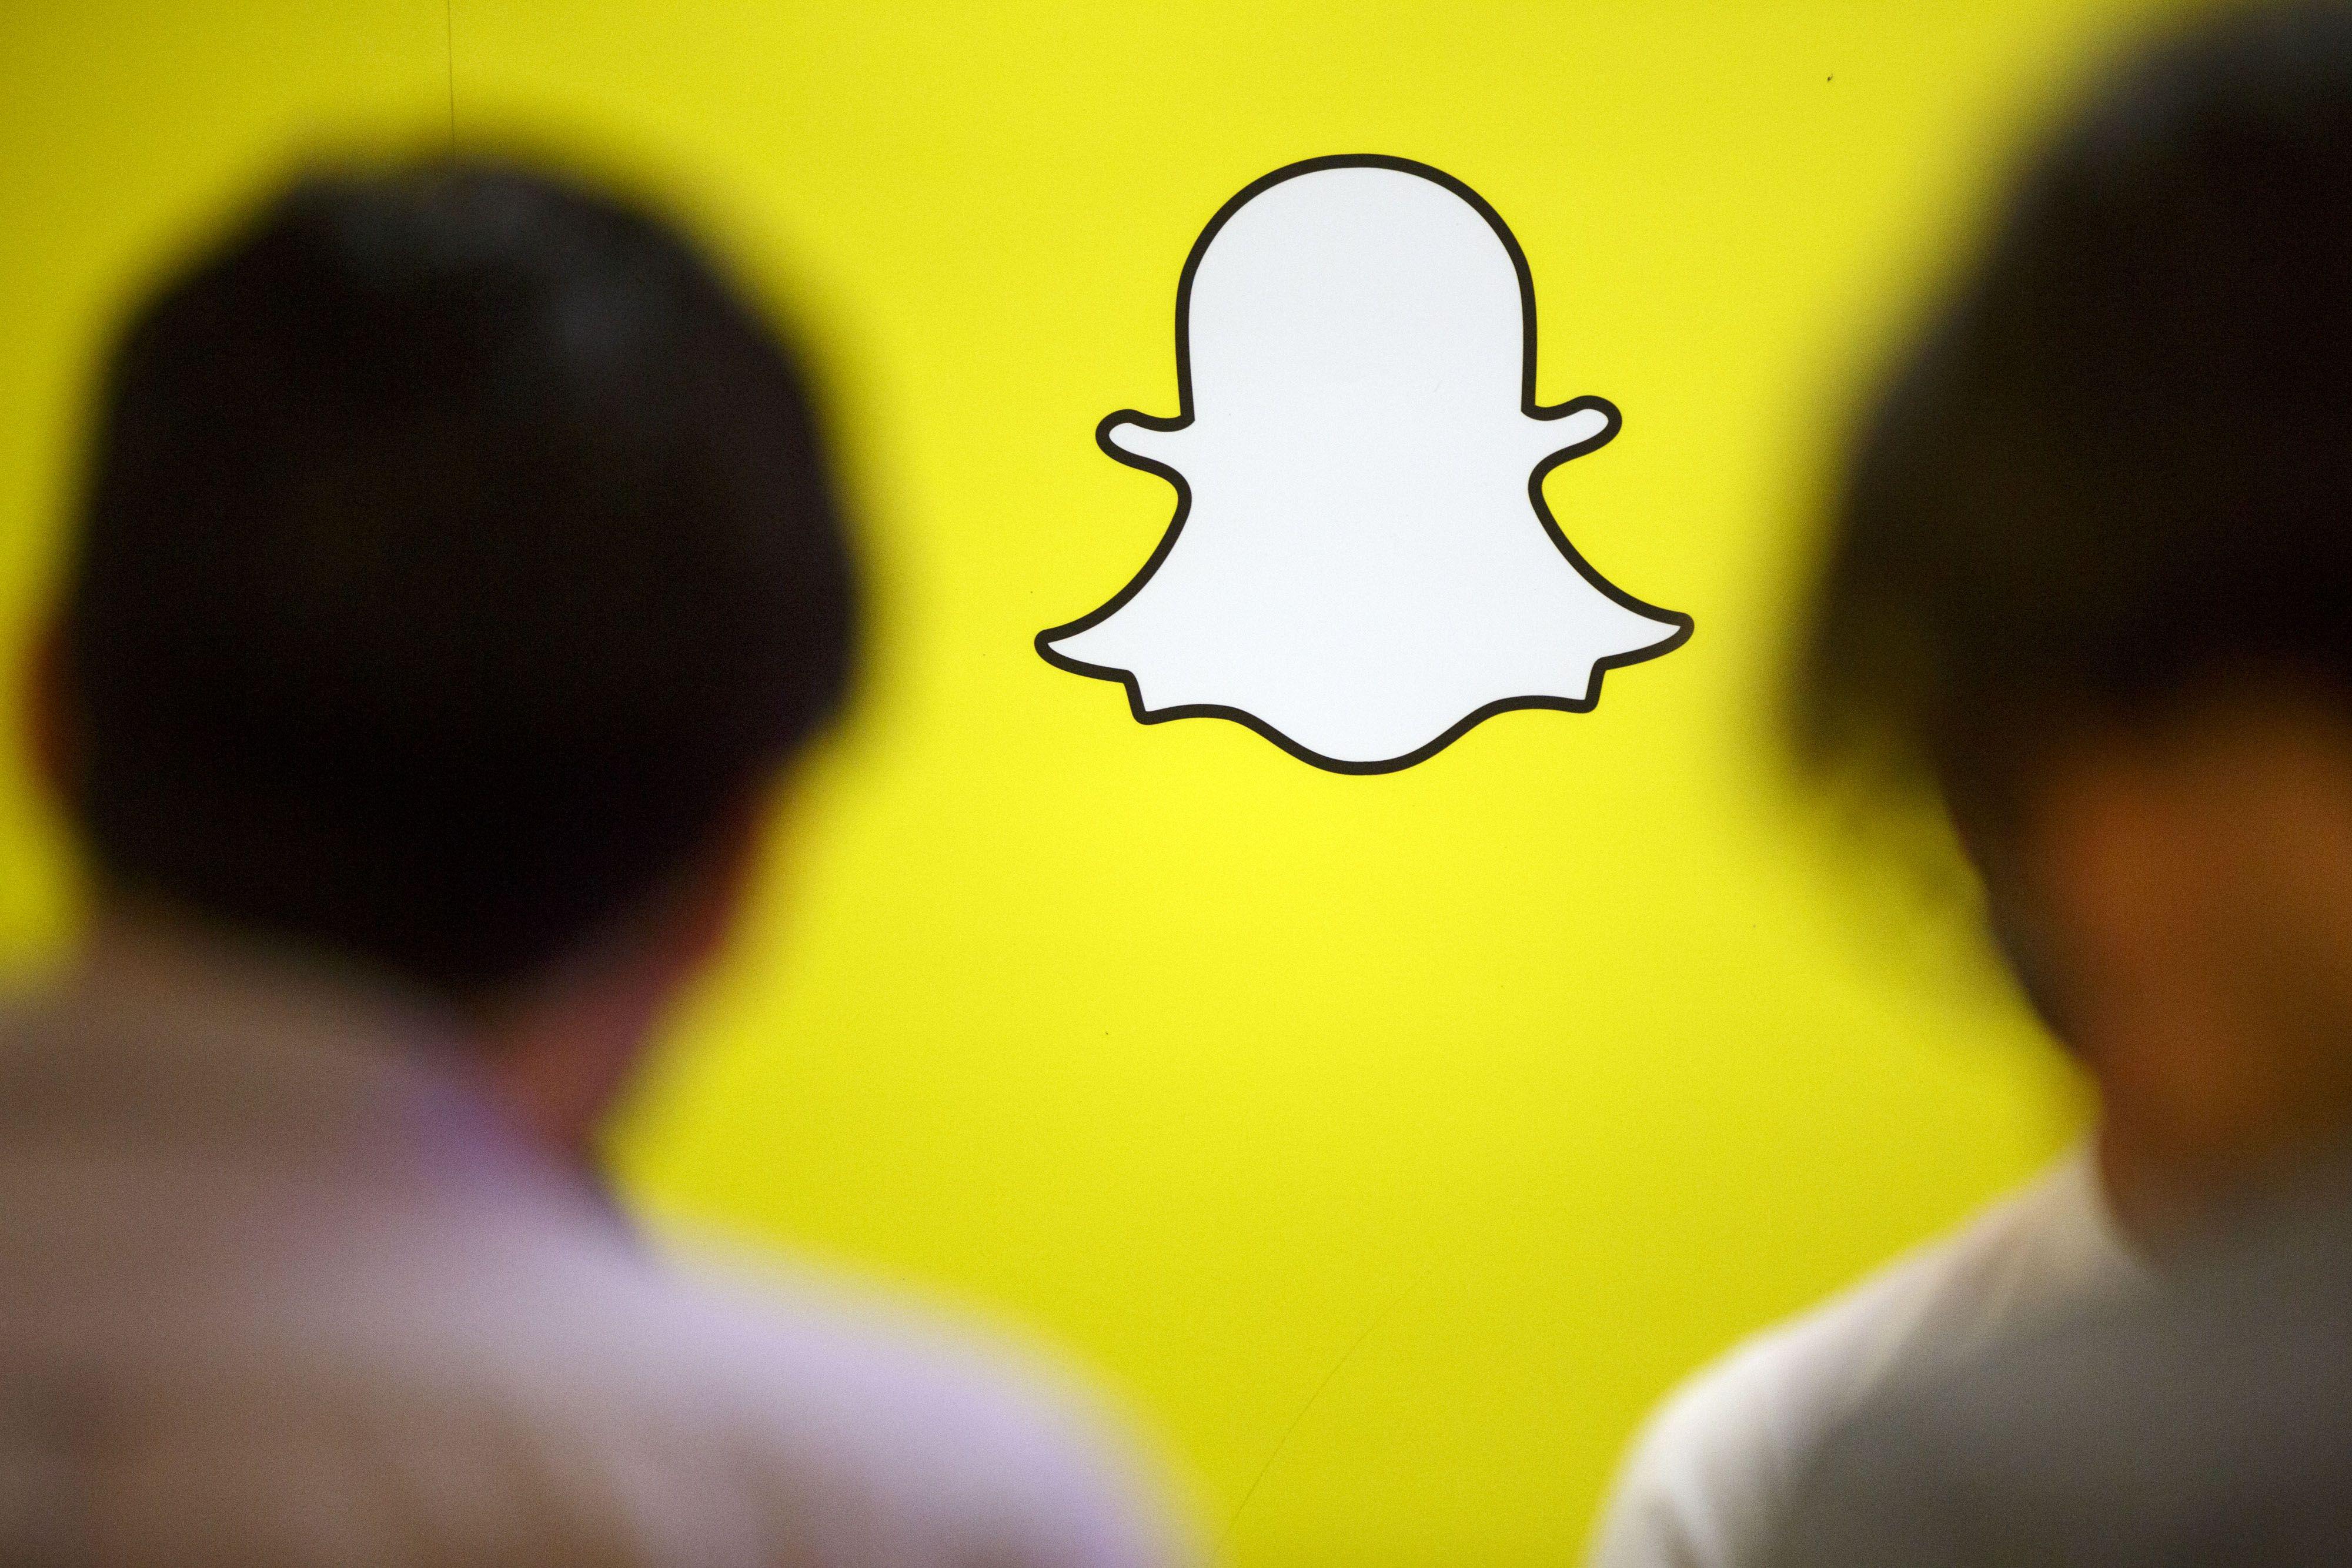 Snapchat Logo - Snapchat: Massive Hack Claim in India Appears to Be Bogus | Fortune